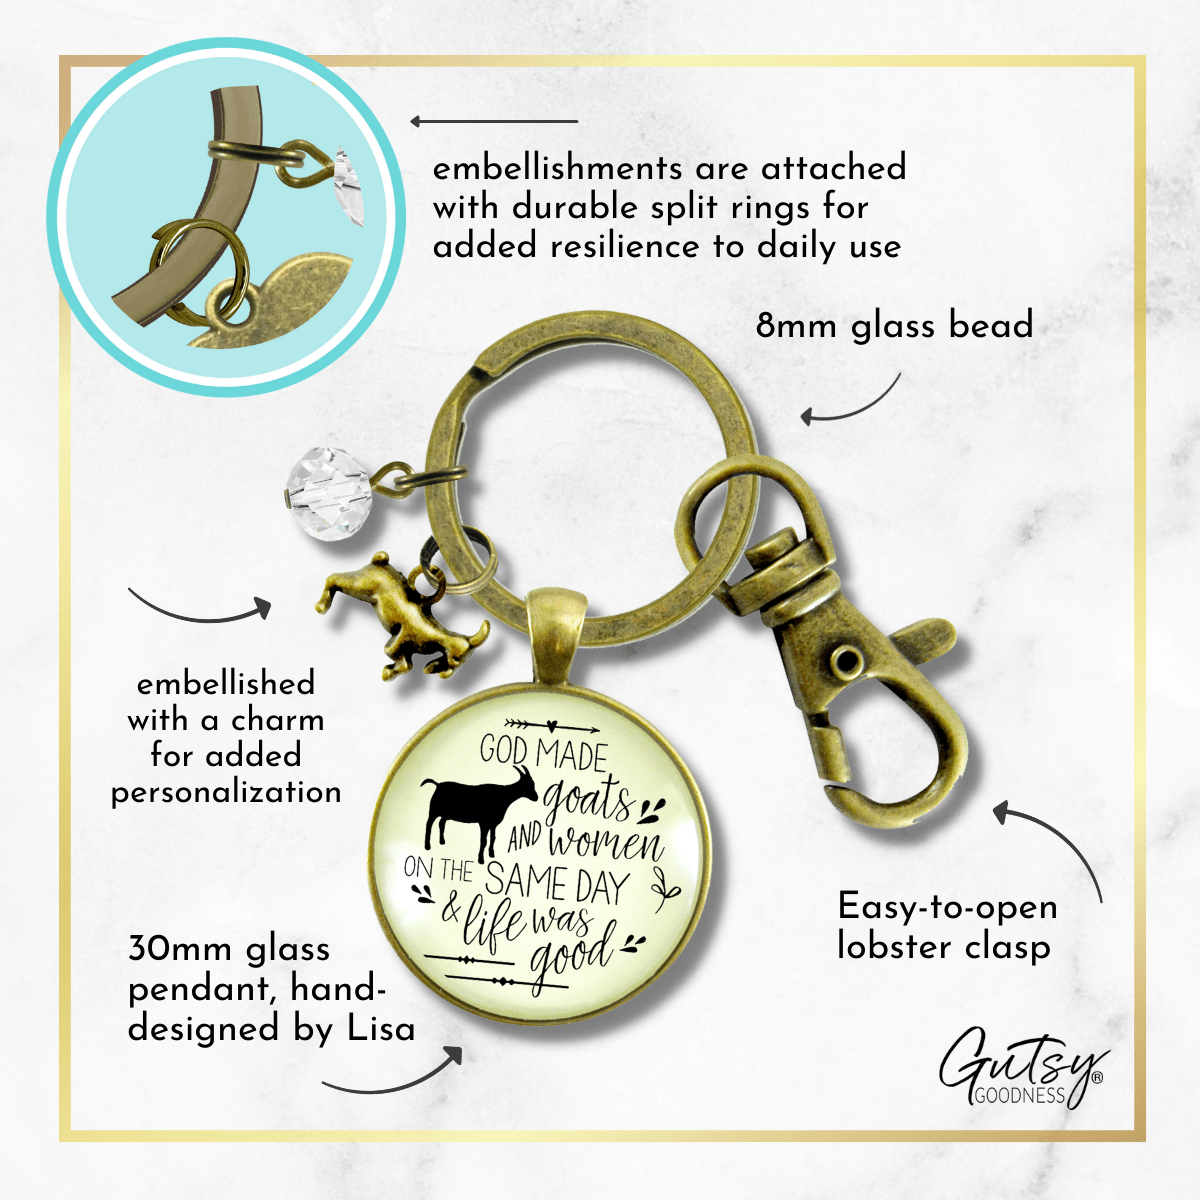 Goat Keychain Funny God Made Goats and Women It Was Good - Gutsy Goodness Handmade Jewelry;Goat Keychain Funny God Made Goats And Women It Was Good - Gutsy Goodness Handmade Jewelry Gifts